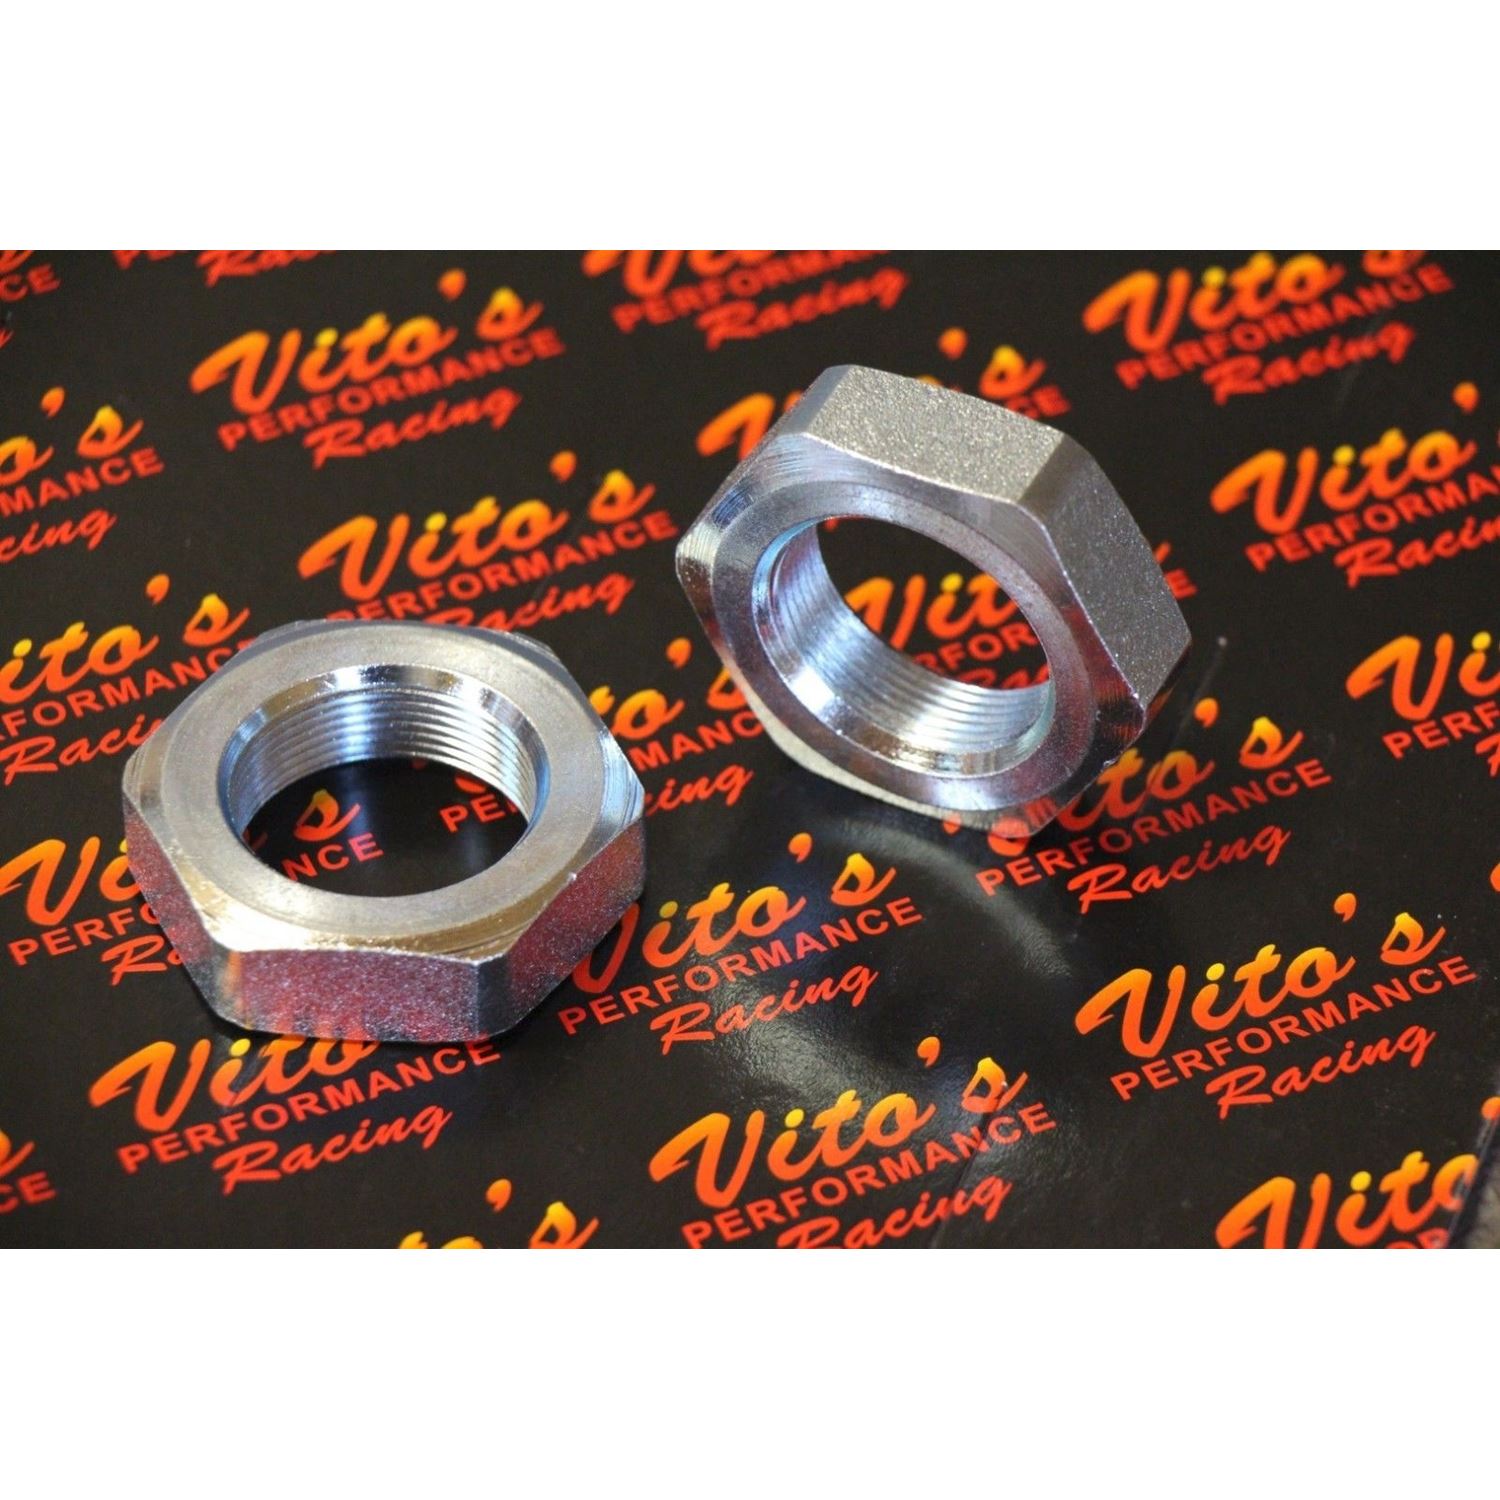 2 x Vito's Performance rear AXLE NUTS for Yama